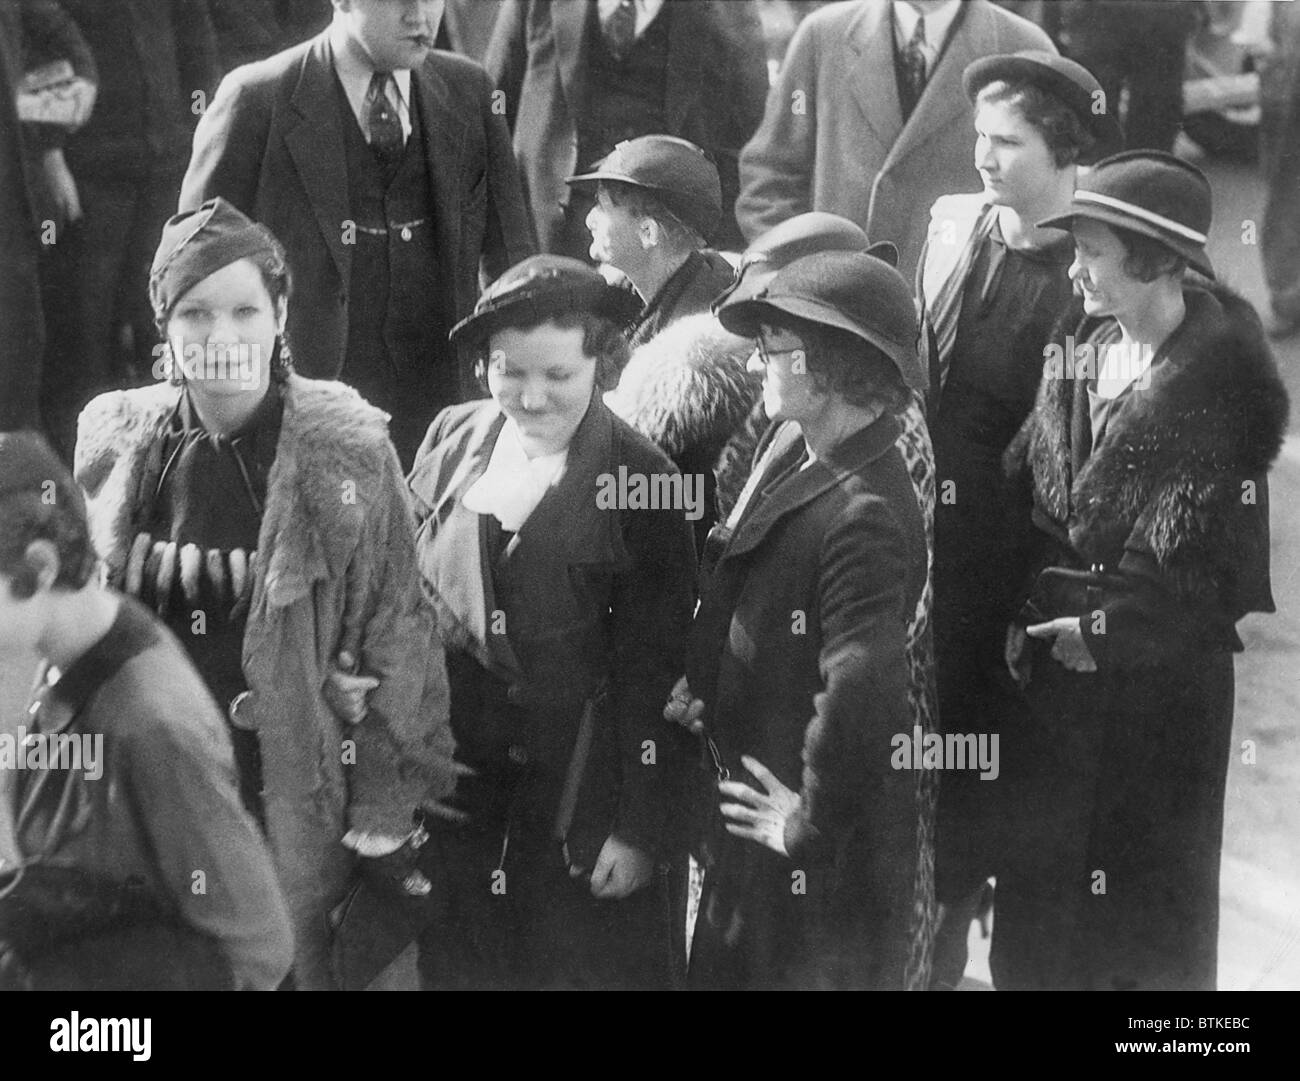 Bonnie and Clyde's friends and relatives were sentenced for harboring fugitives from justice in Dallas Texas, Feb 26, 1935. L to R: Billie Mace, Mary O'Dake, Mrs. Emma Parker, Mrs. Alice Davis, Rear are Mrs. Cummie Barrow & Mrs. Mildred Hamilton. Stock Photo